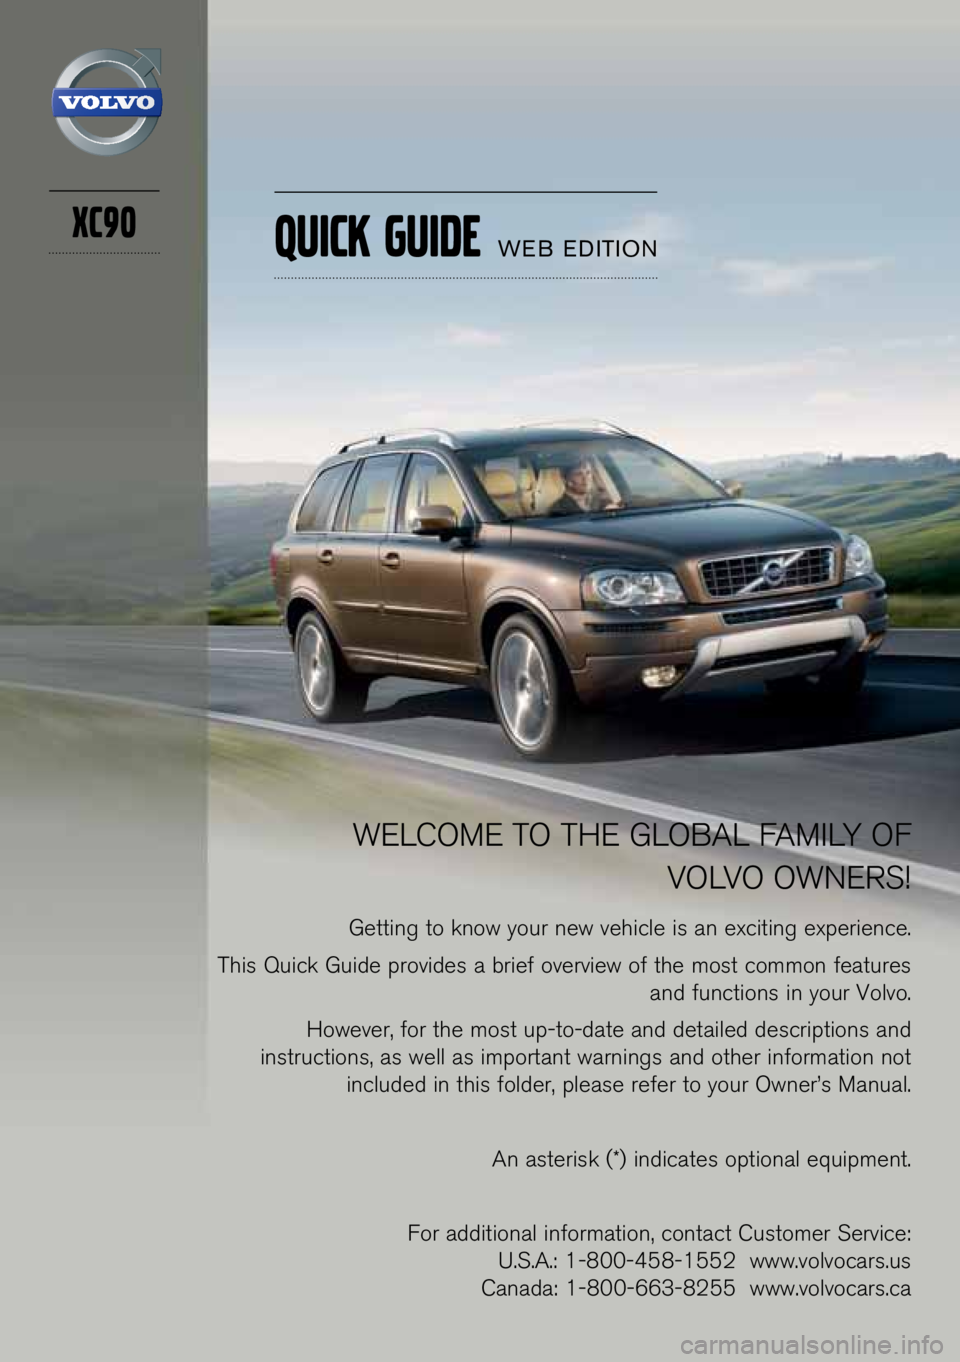 VOLVO XC90 2013  Quick Guide WELCOME TO THE GLOBAL FAMILY OF VOLVO OWNERS\f
Getti\bg to k\bow your \bew vehicle is a\b exciti\bg experie\bce.
This Quick Guide provides a brief overview of the most commo\b features  a\bd fu\bctio\